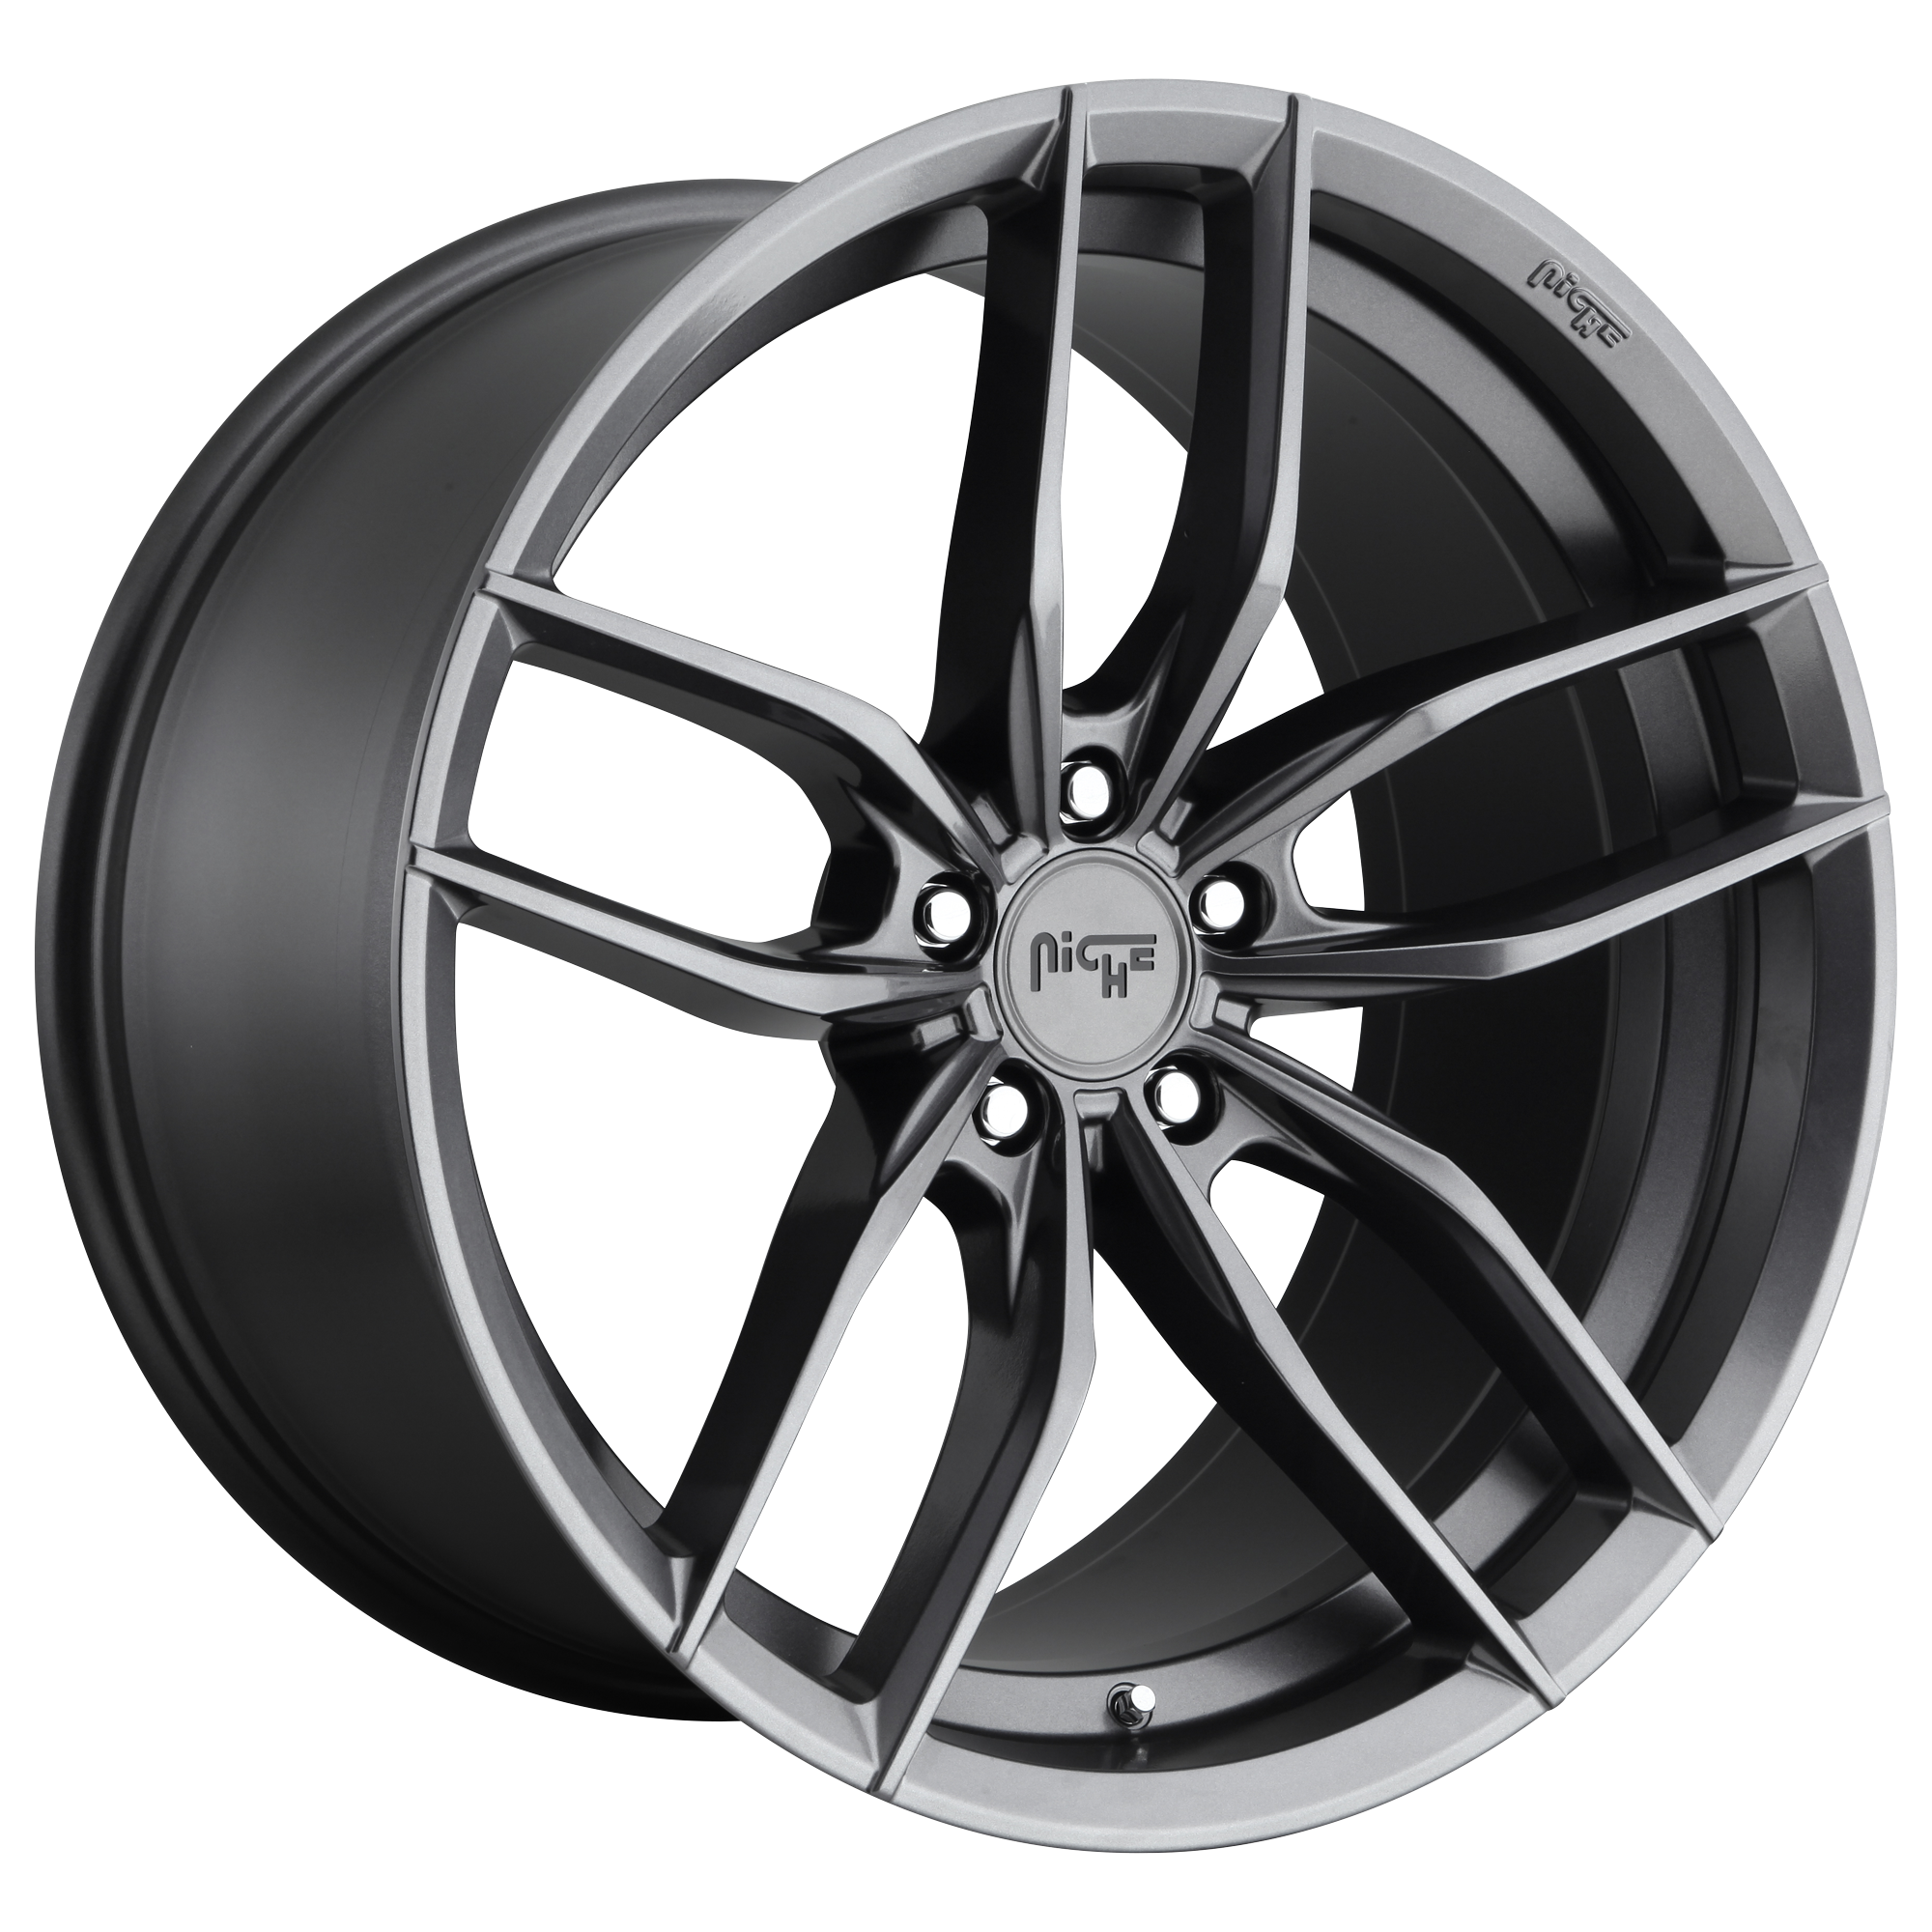 VOSSO 18x8 5x100.00 MATTE ANTHRACITE (40 mm) - Tires and Engine Performance